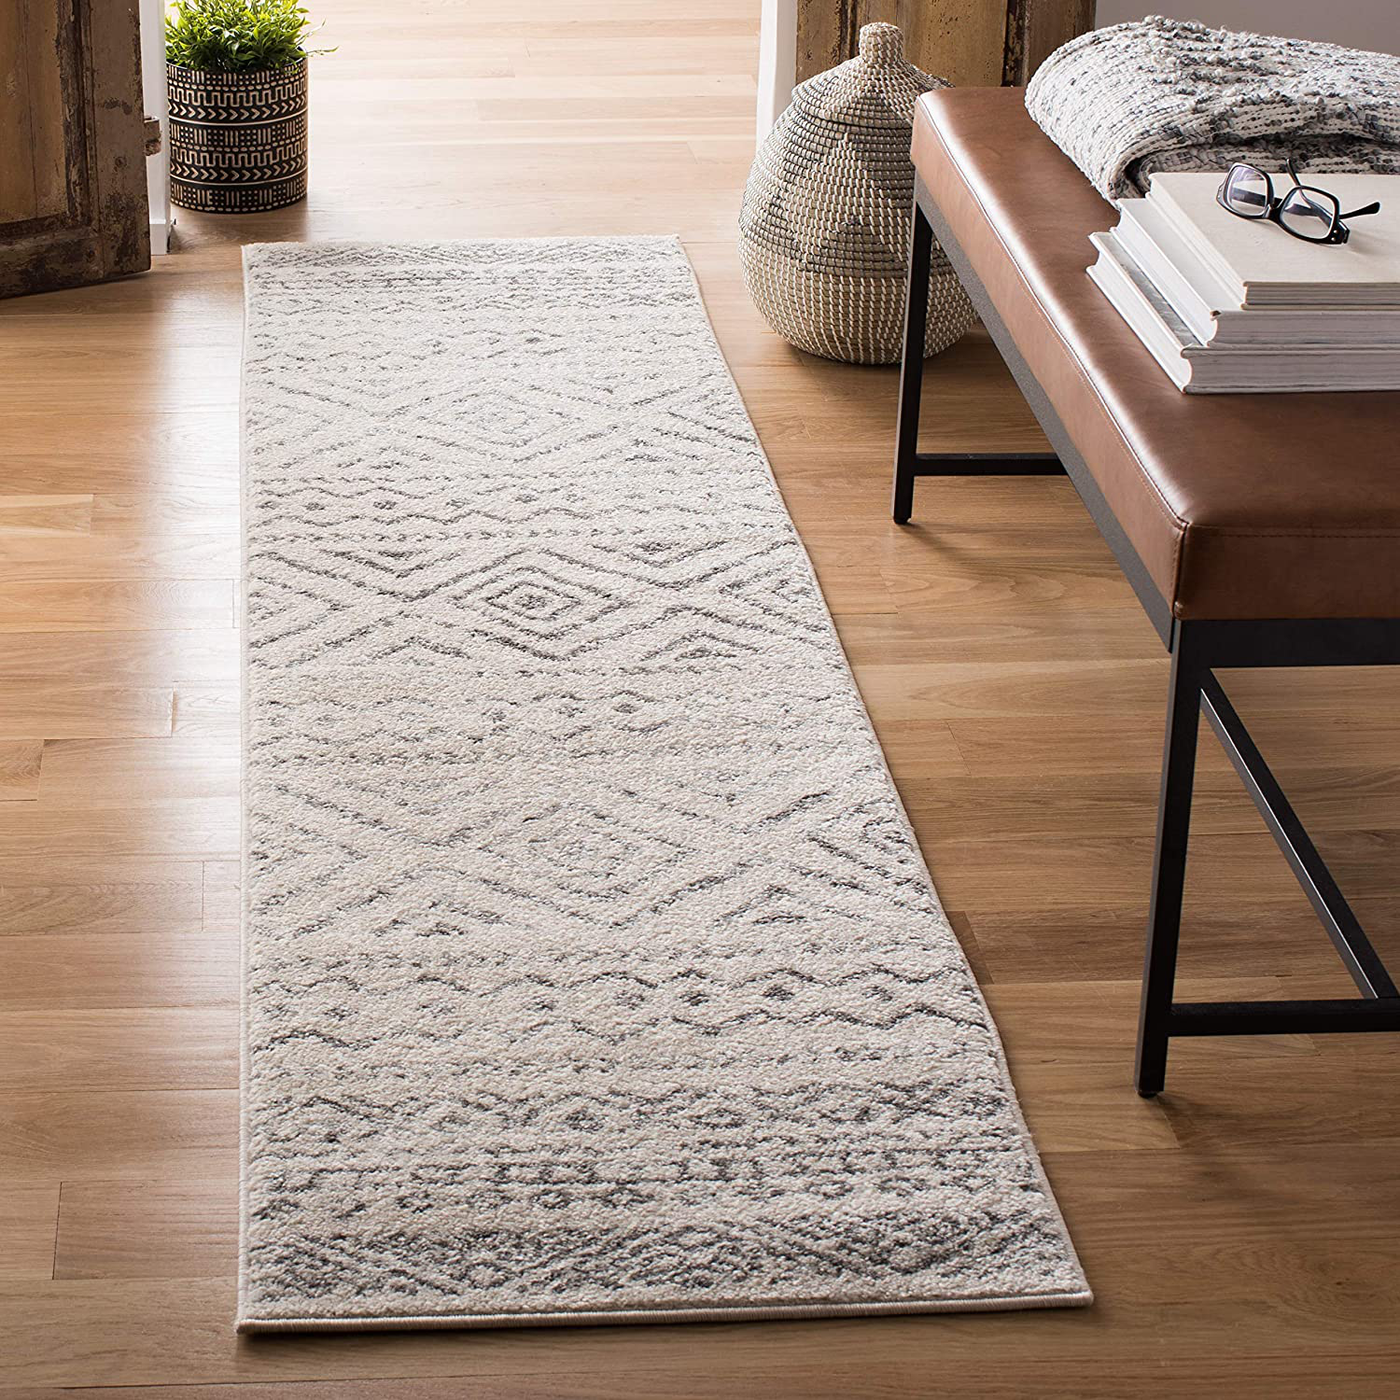 Safavieh Tulum Collection TUL267A Moroccan Boho Distressed Non-Shedding Stain Resistant Living Room Bedroom Runner, 2' x 17' , Ivory / Grey